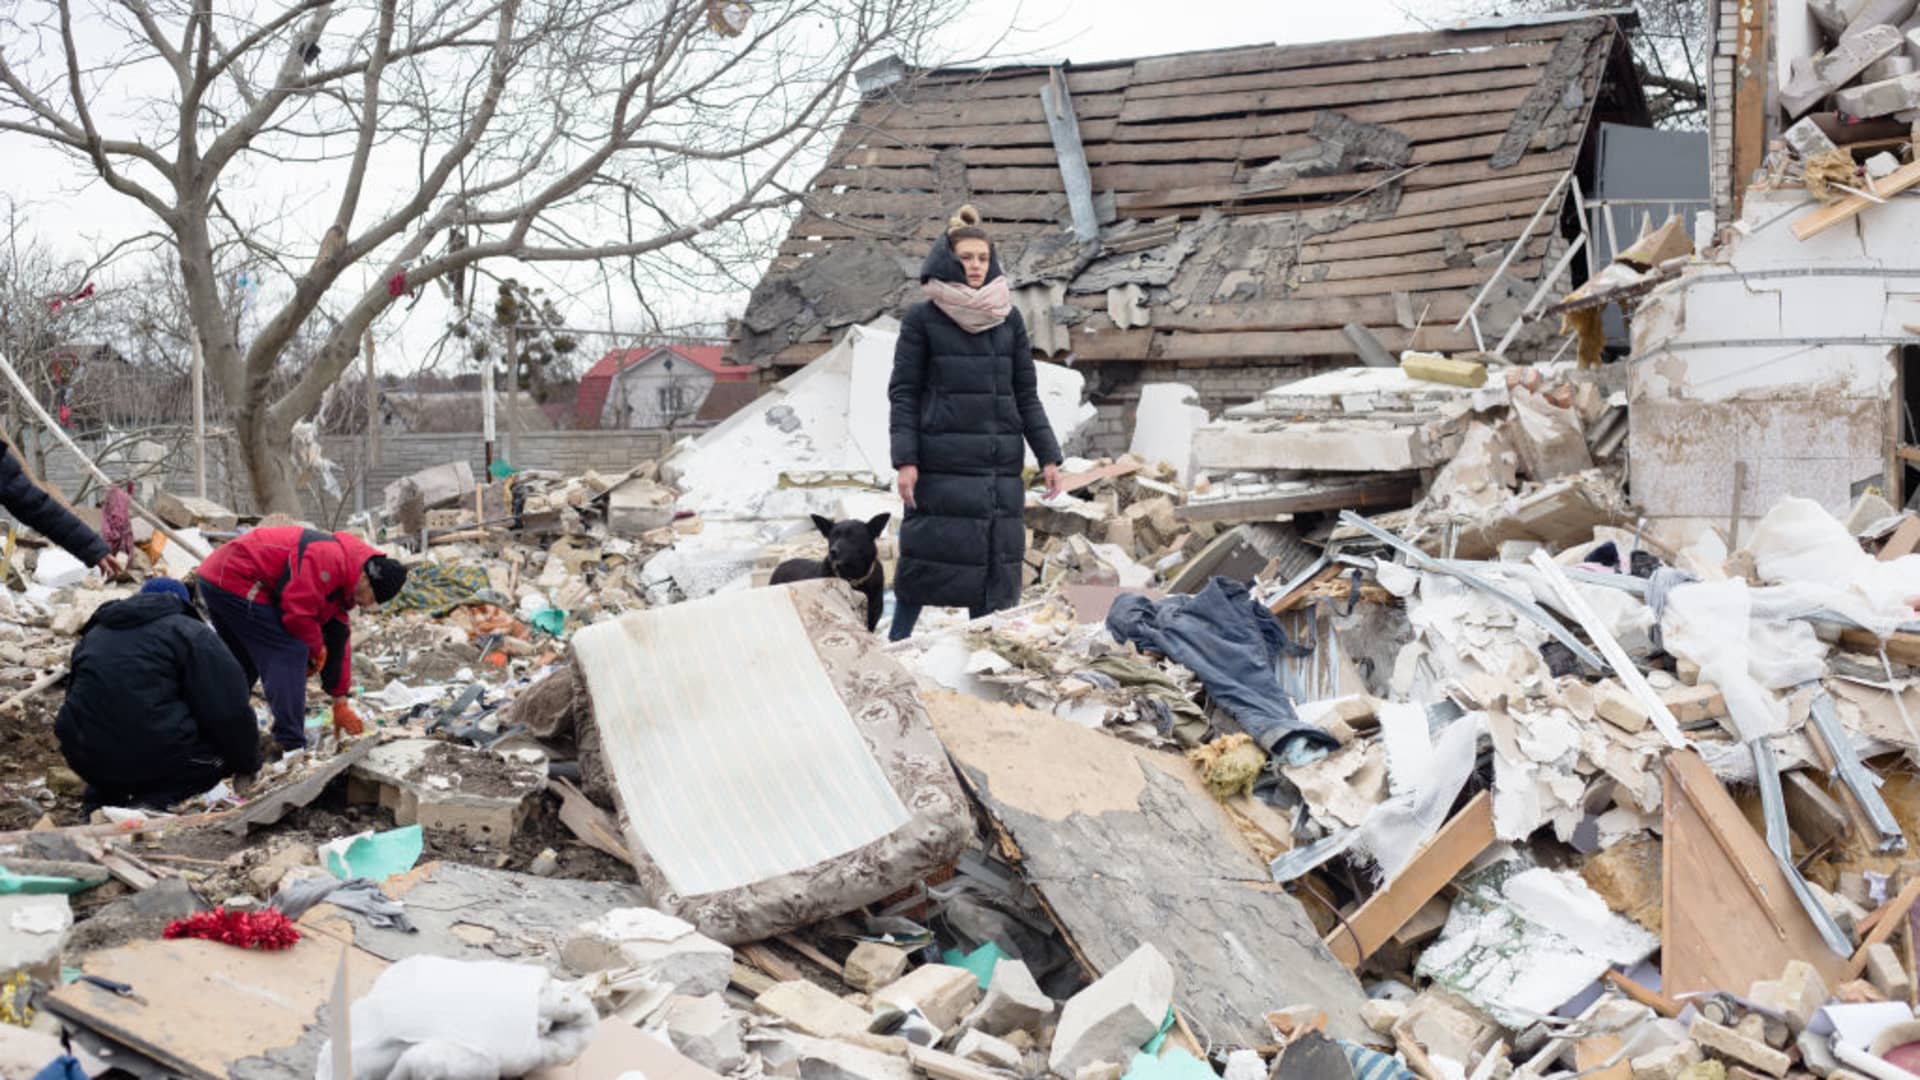 Kateryna Ralchuk, the niece of Ihor Mazhayev who's house was shelled, helps to remove the rubble after the shelling on March 5, 2022 in Markhalivka, Ukraine.